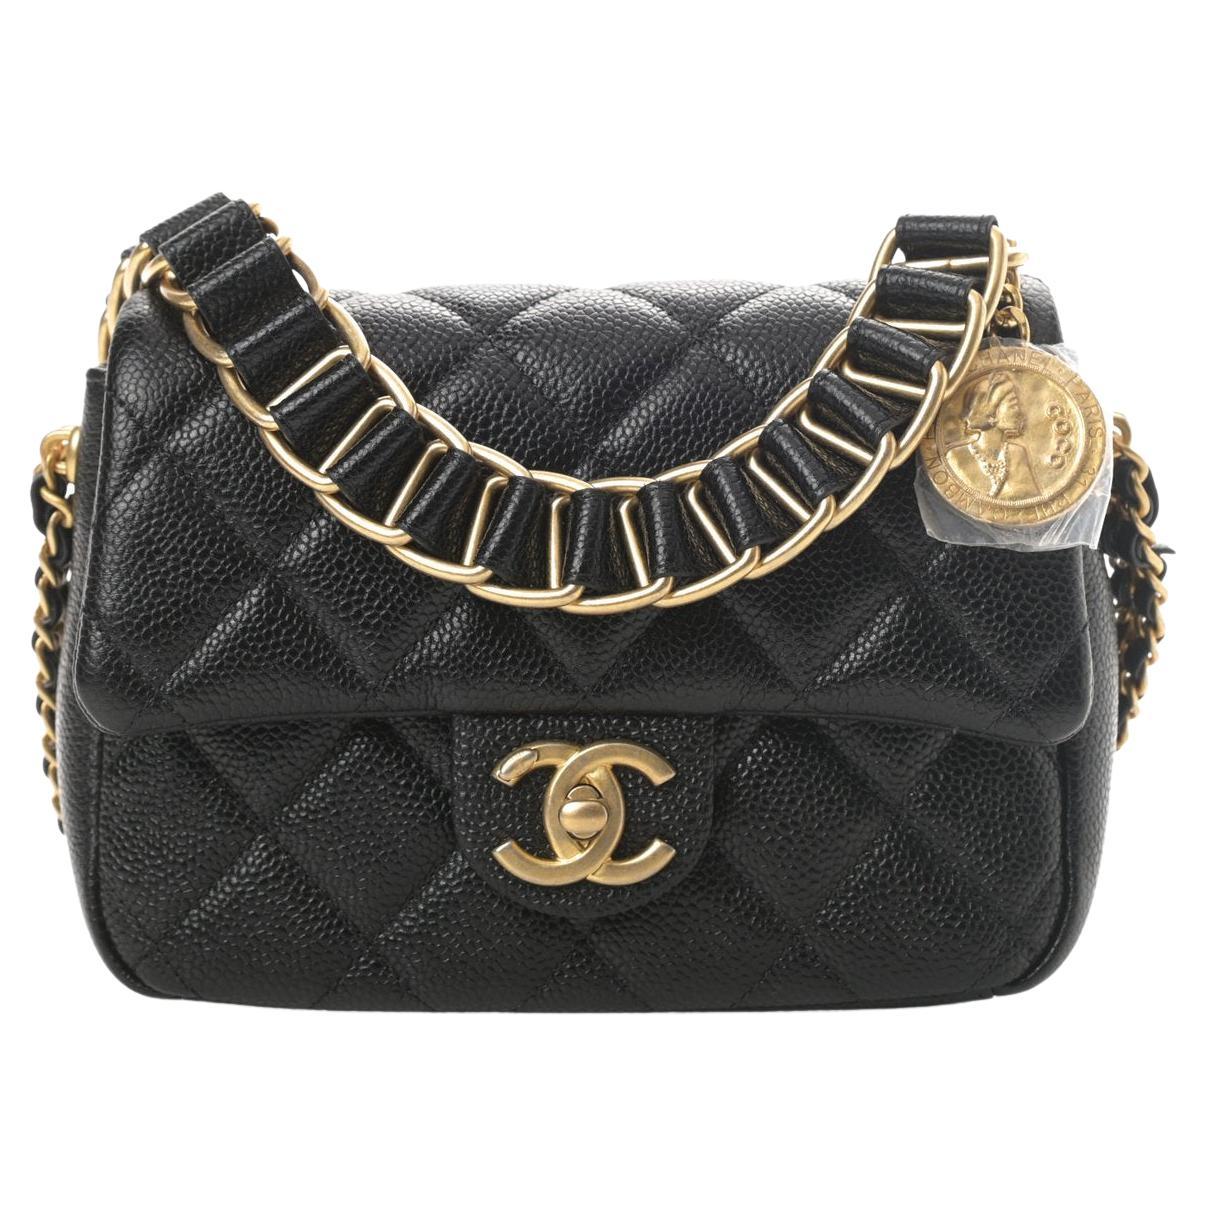 CHANEL NEW Black Caviar Leather Quilted Gold Hardware Mini Chain